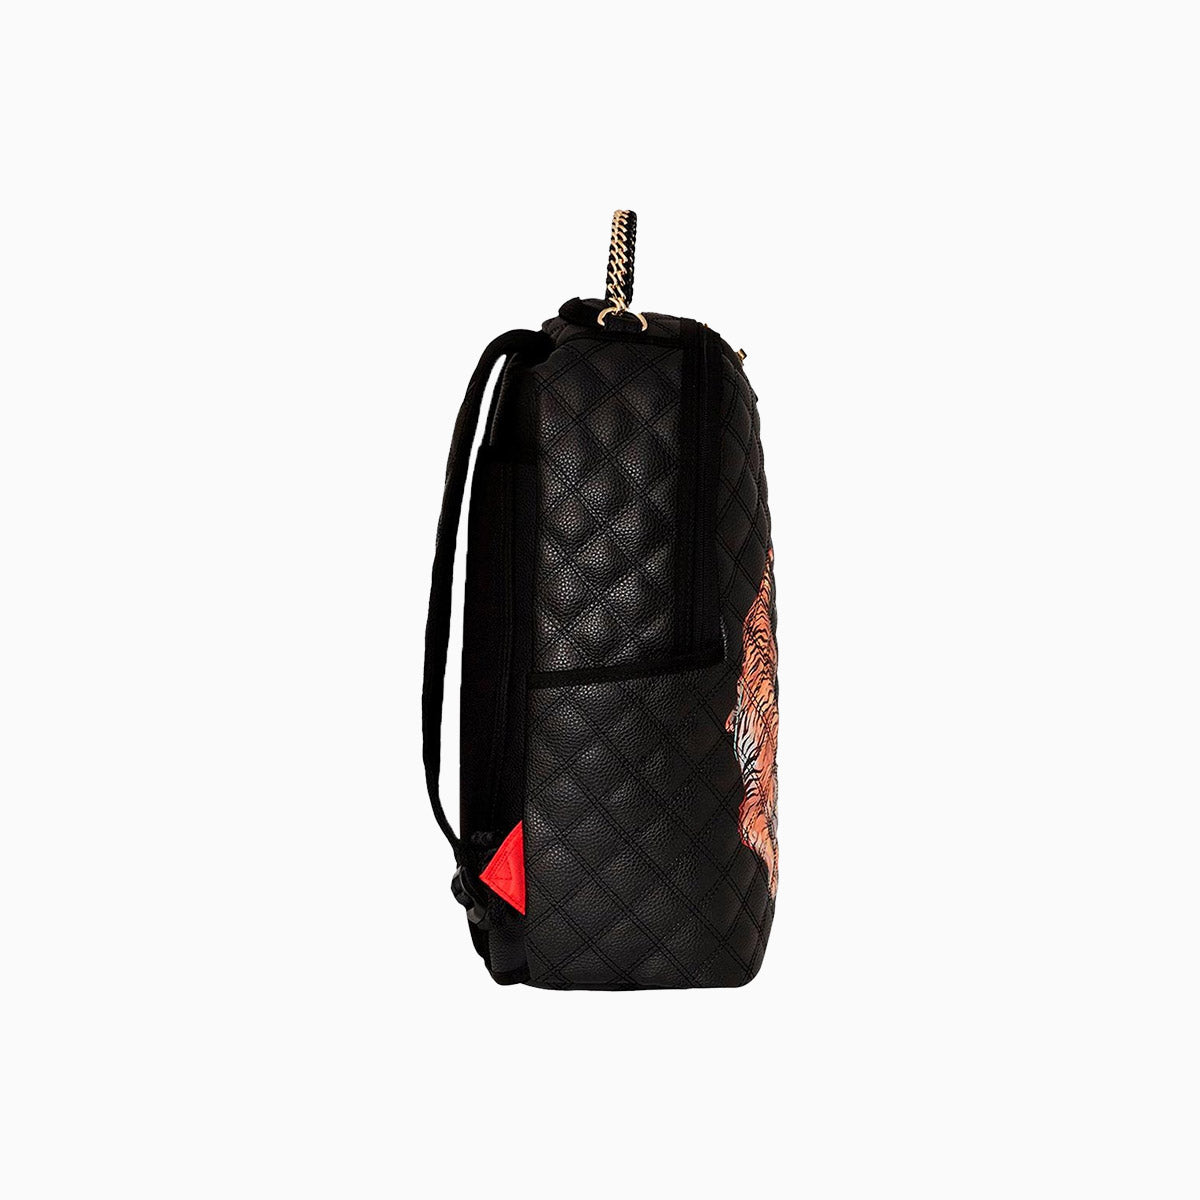 spray-ground-the-money-tigers-backpack-b5399-blk